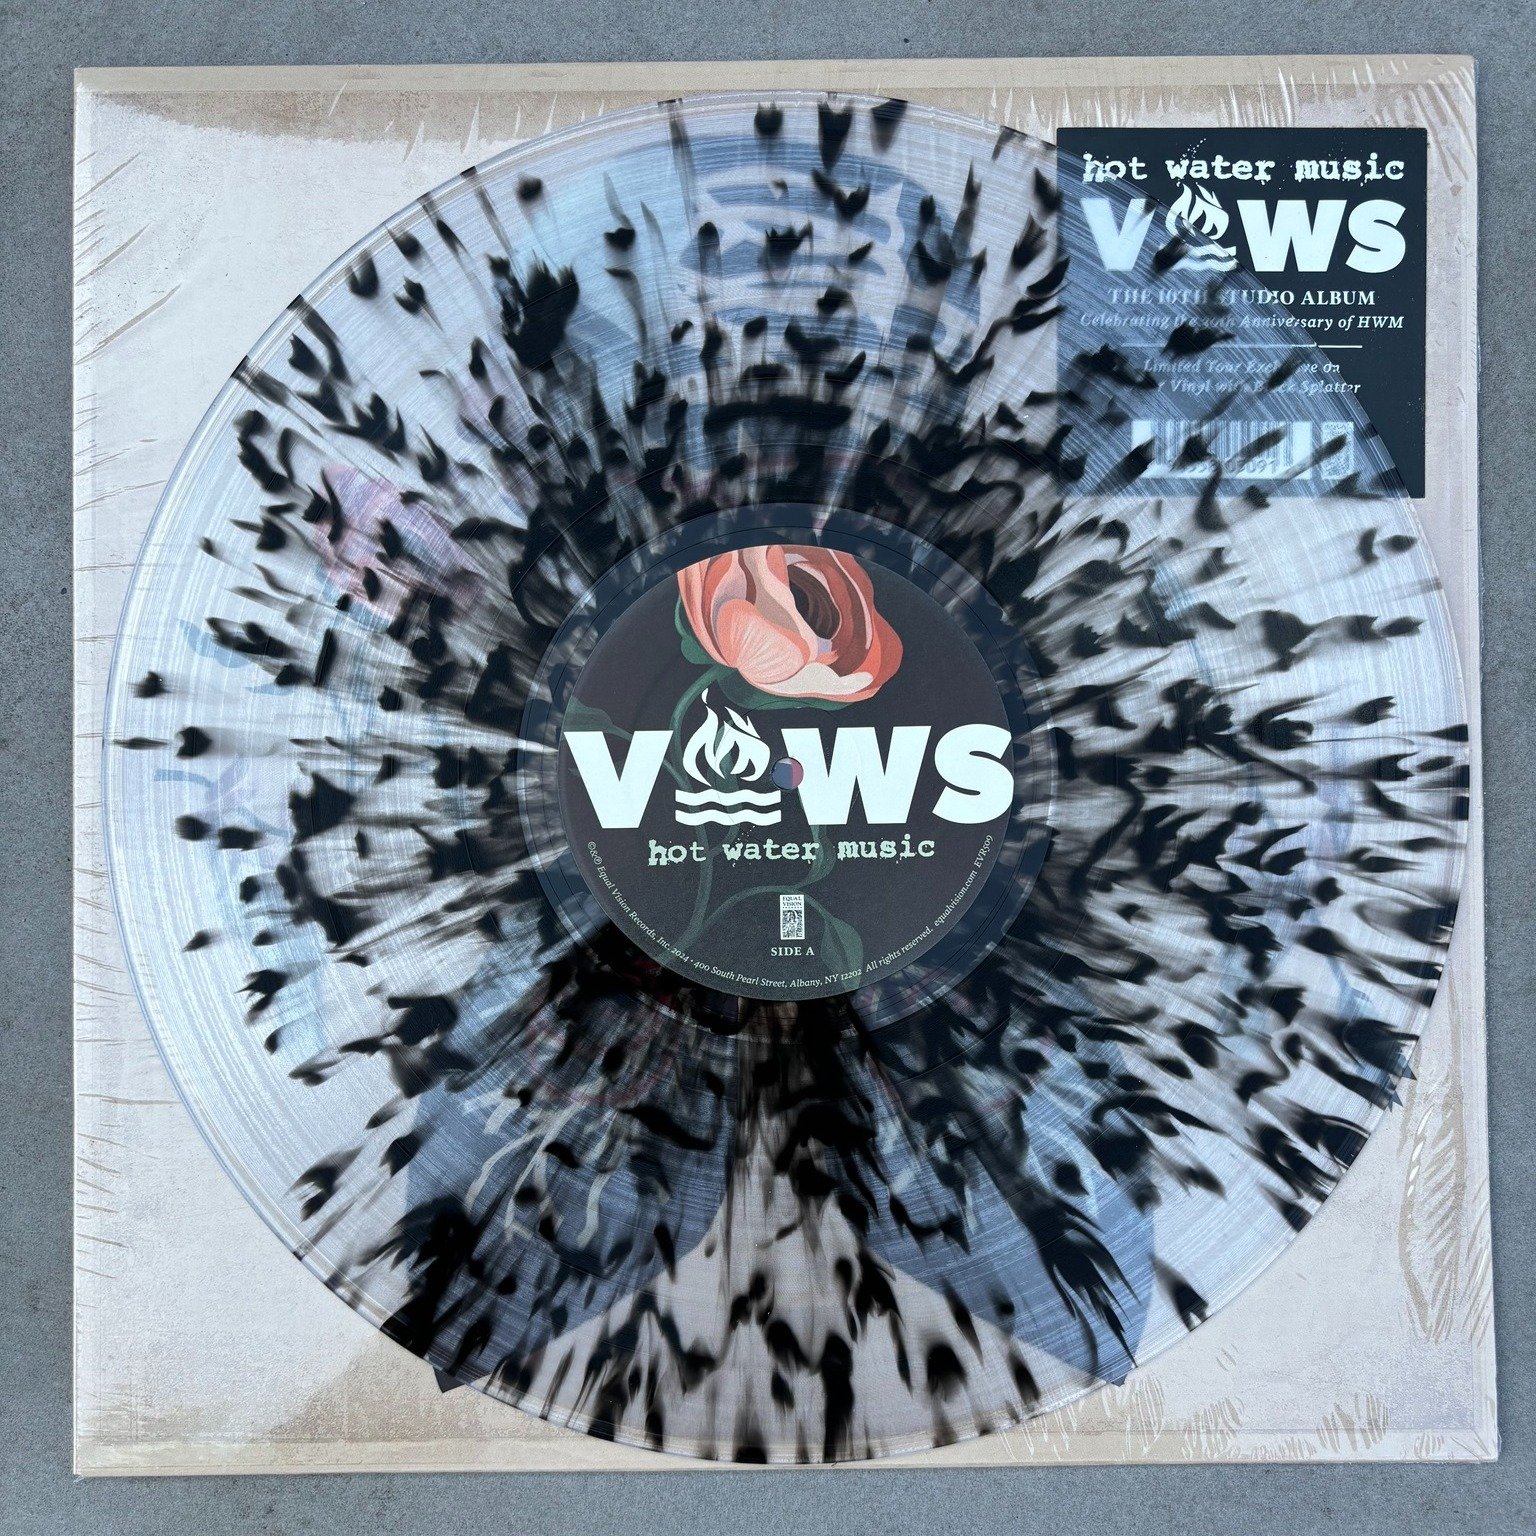 We'd like to thank @burlingtonrecordplant for absolutely crushing the vinyl for the US pressing of VOWS on @equalvision 

Here are some shots of the limited tour exclusive LP (clear w black splatter). There are only 250 of these and we will have them